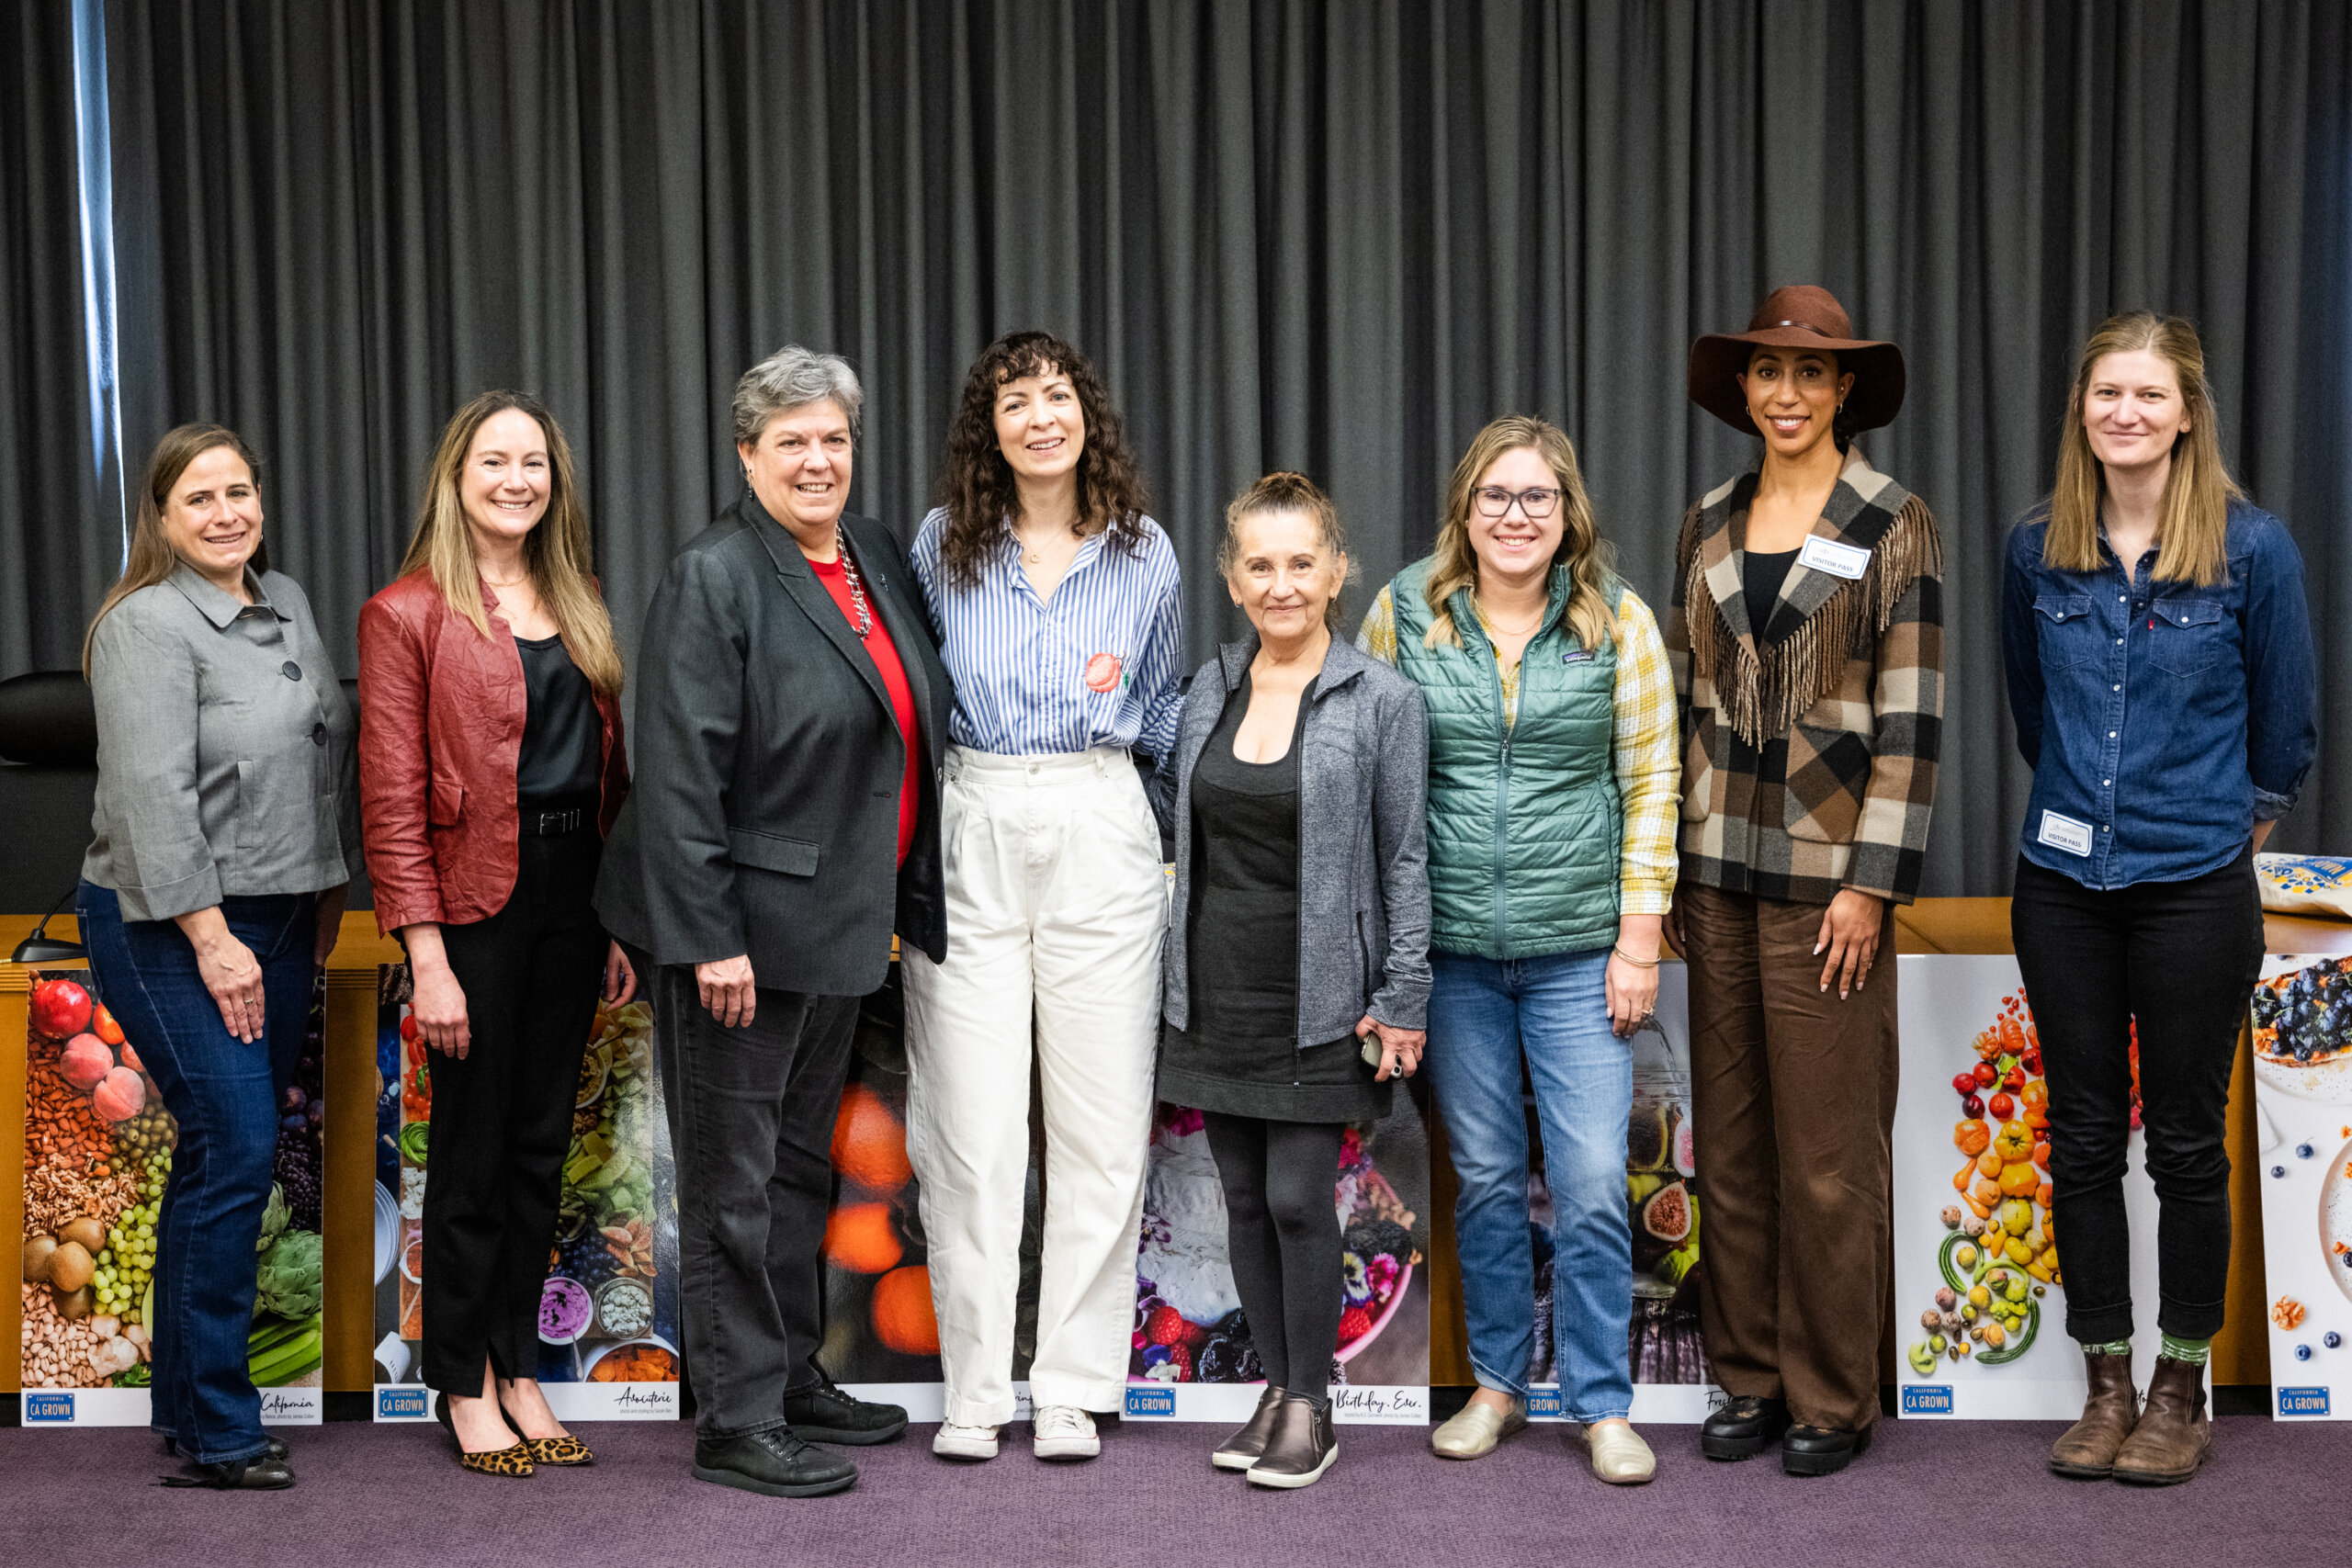 Panelists from CDFA's Women in Ag event in partnership with Cherry Bombe